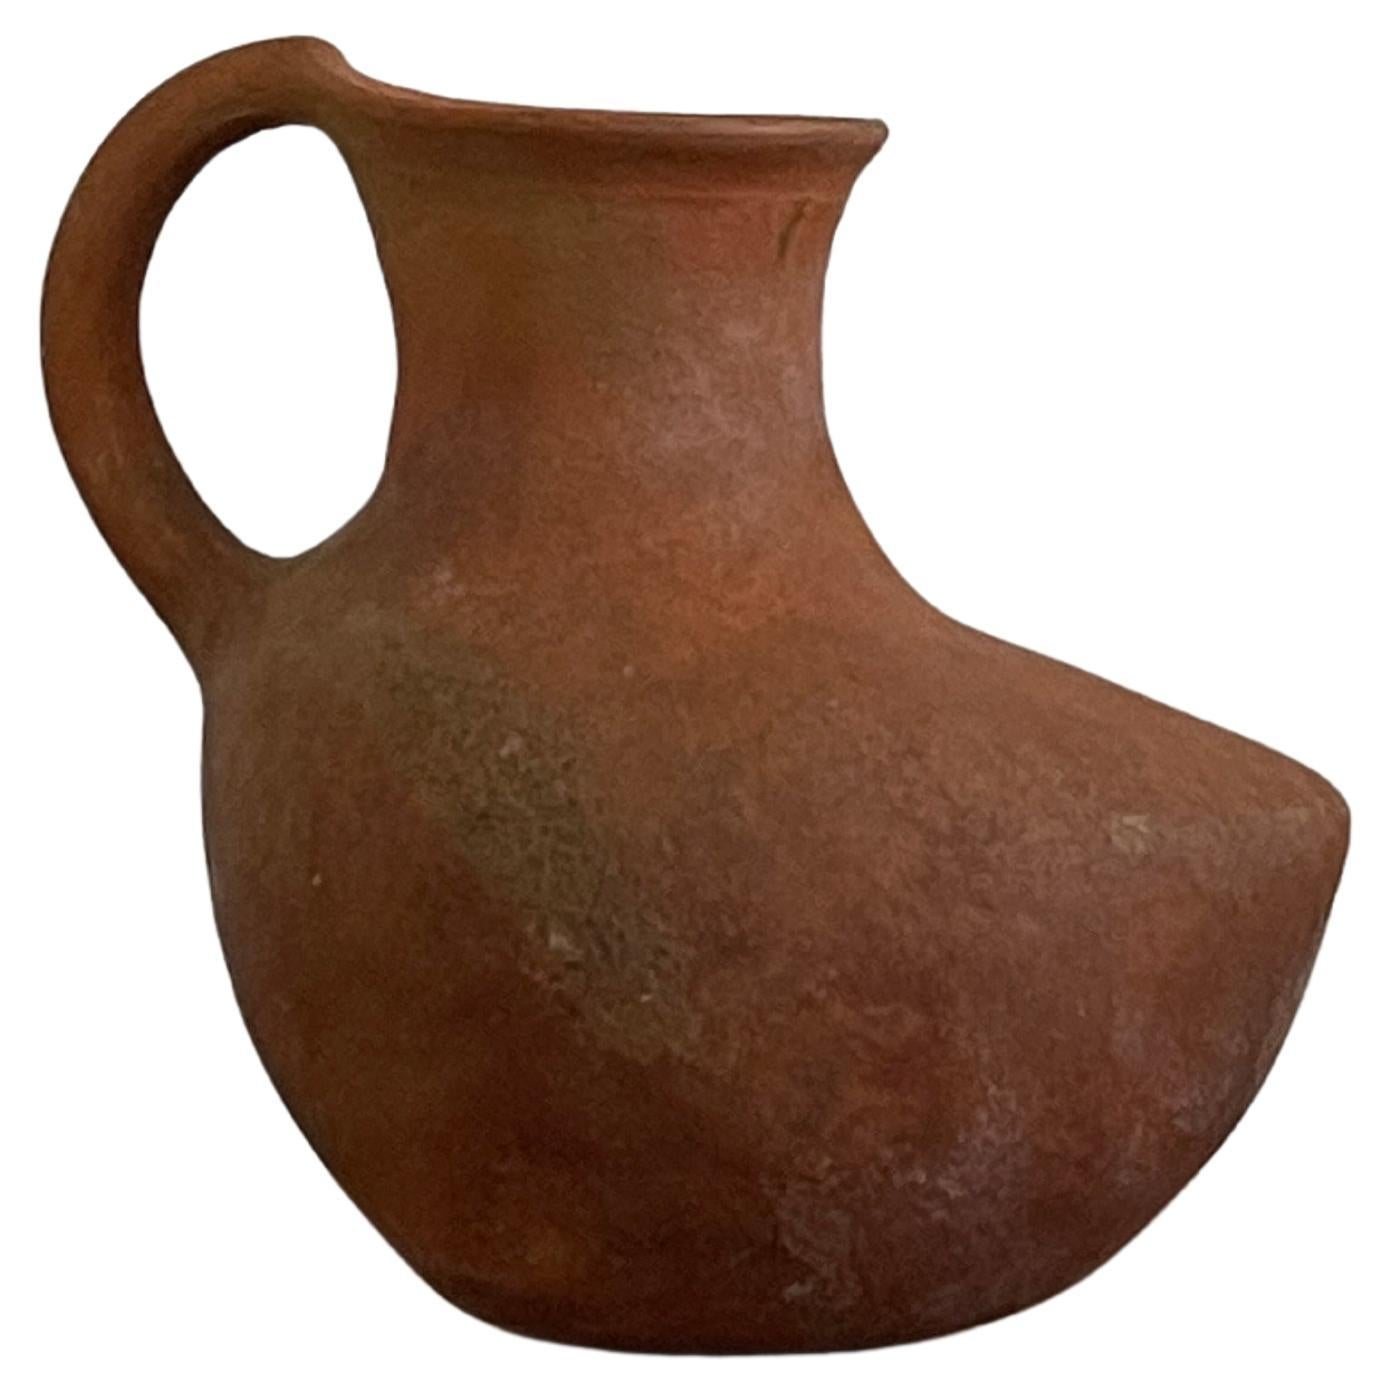 20th Century Oaxacan ceramic pitcher expertly hand crafted with a curved organic body in Mexico. Amazing piece with character in an earthy color tone. Perfect for use or display. Sturdy with no cracks and in great vintage condition.

